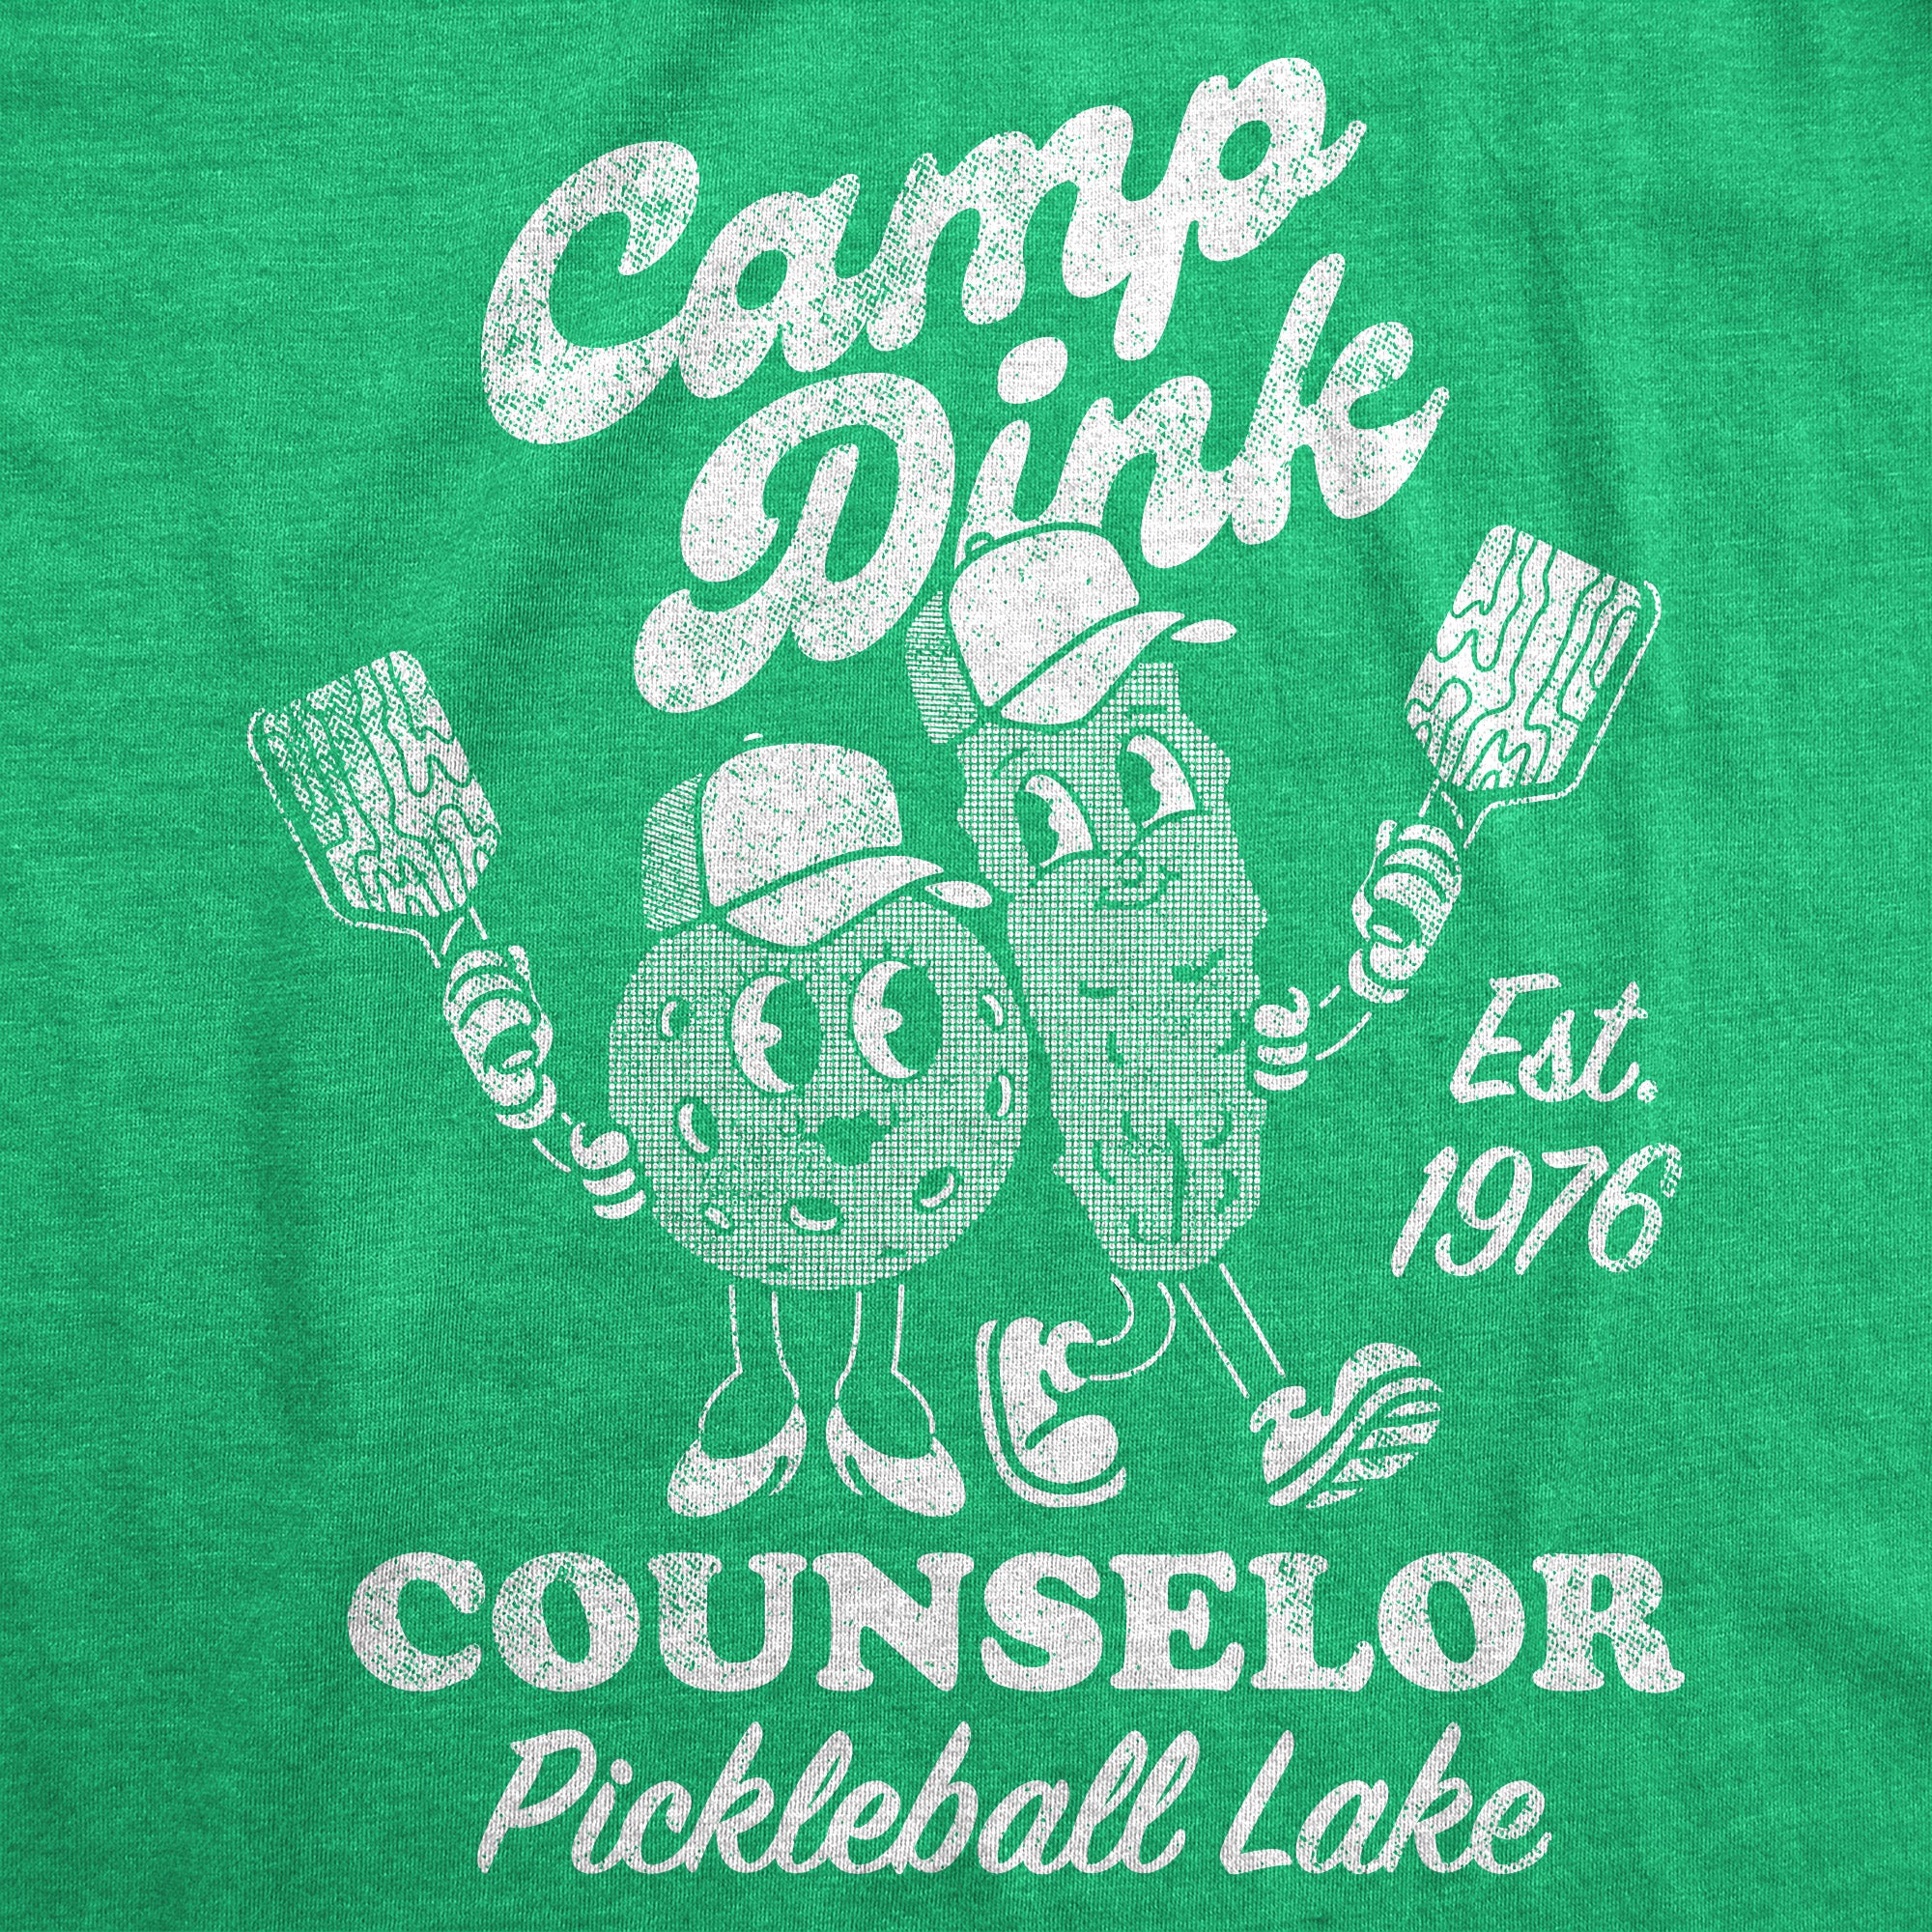 Funny Heather Green - Camp Dink Camp Dink Counselor Pickleball Lake Womens T Shirt Nerdy Sarcastic Tee